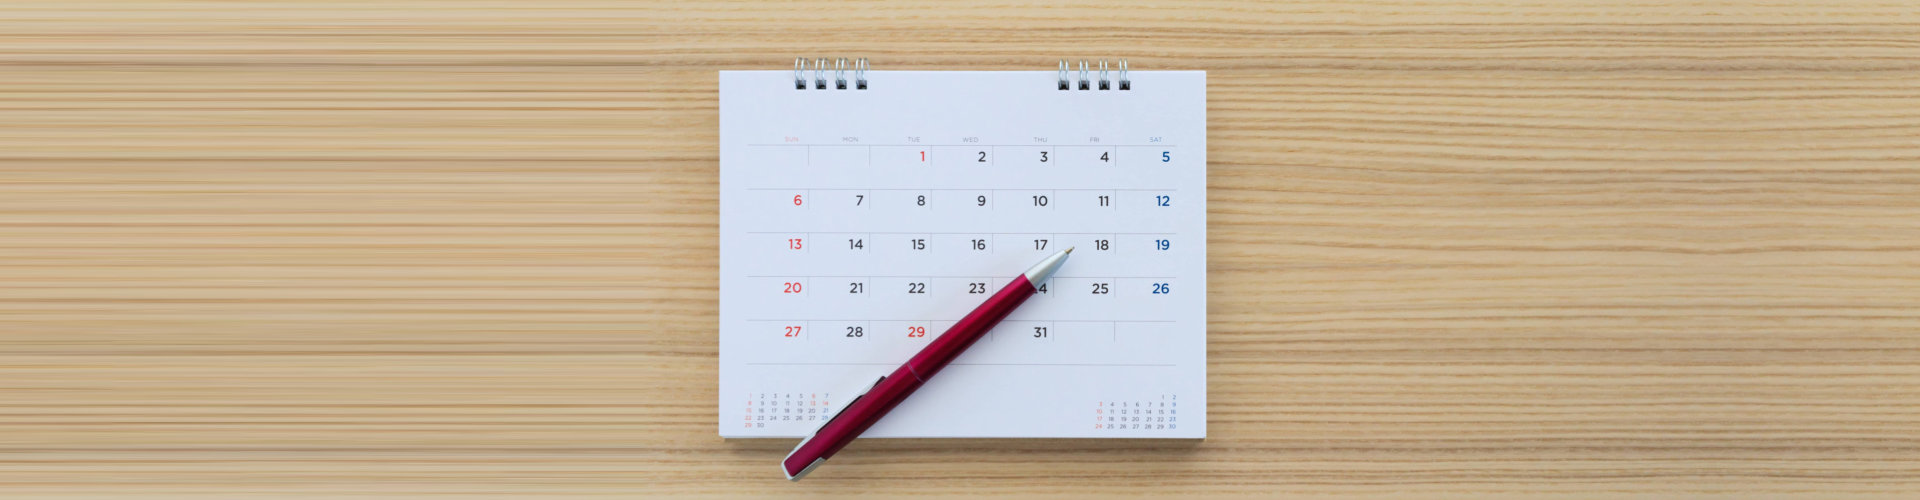 calendar and a pen on a wooden table